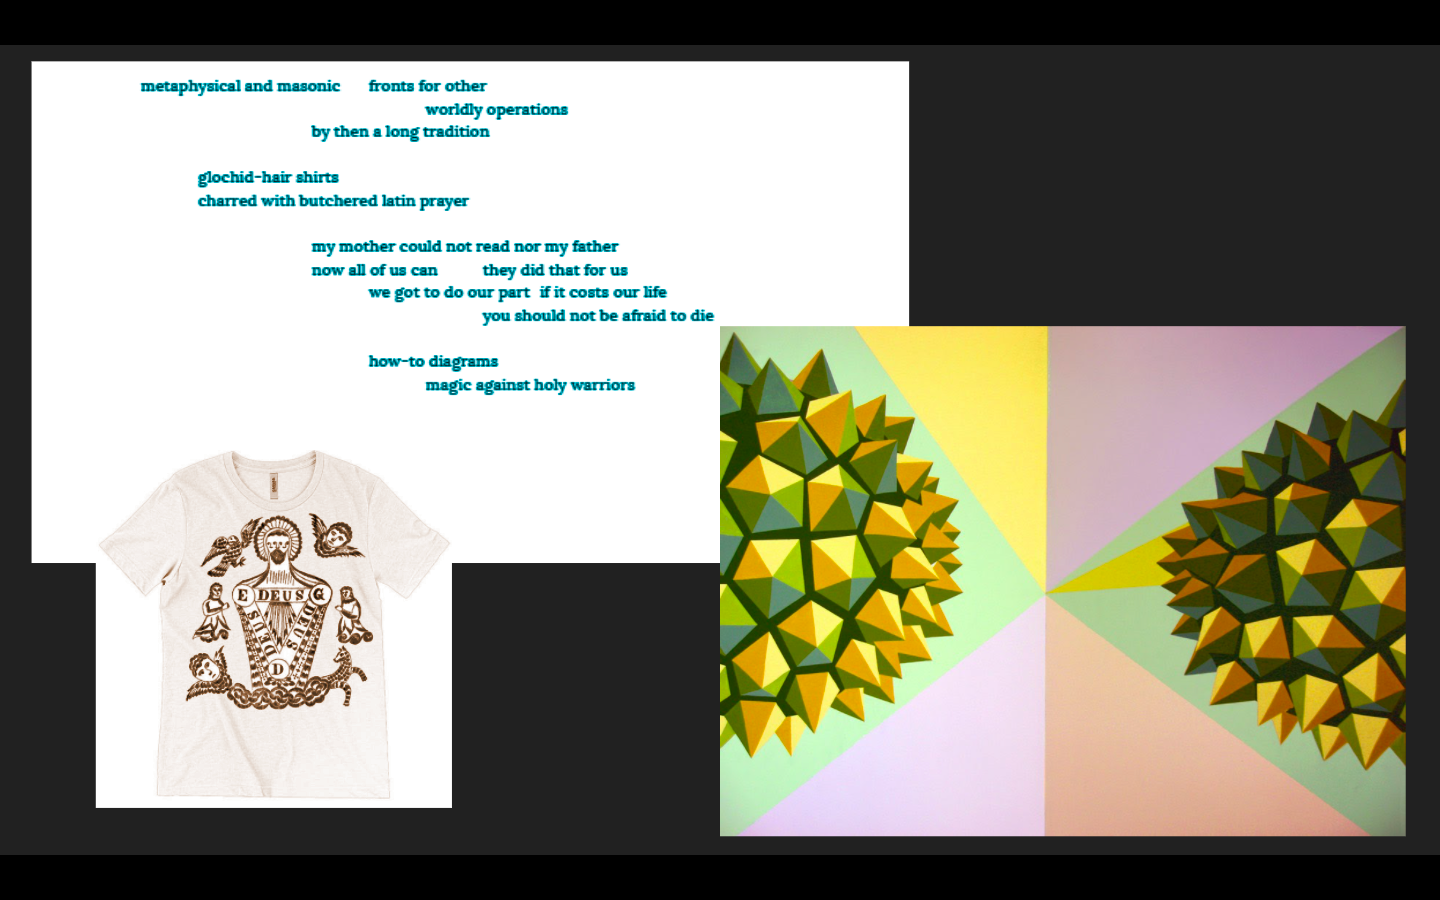  SOURCES:  http://wofflehouse.com/portfolio/doubledurian/ ; https://www.etsy.com/listing/757930450/anting-anting-t-shirt-infinito-dios 